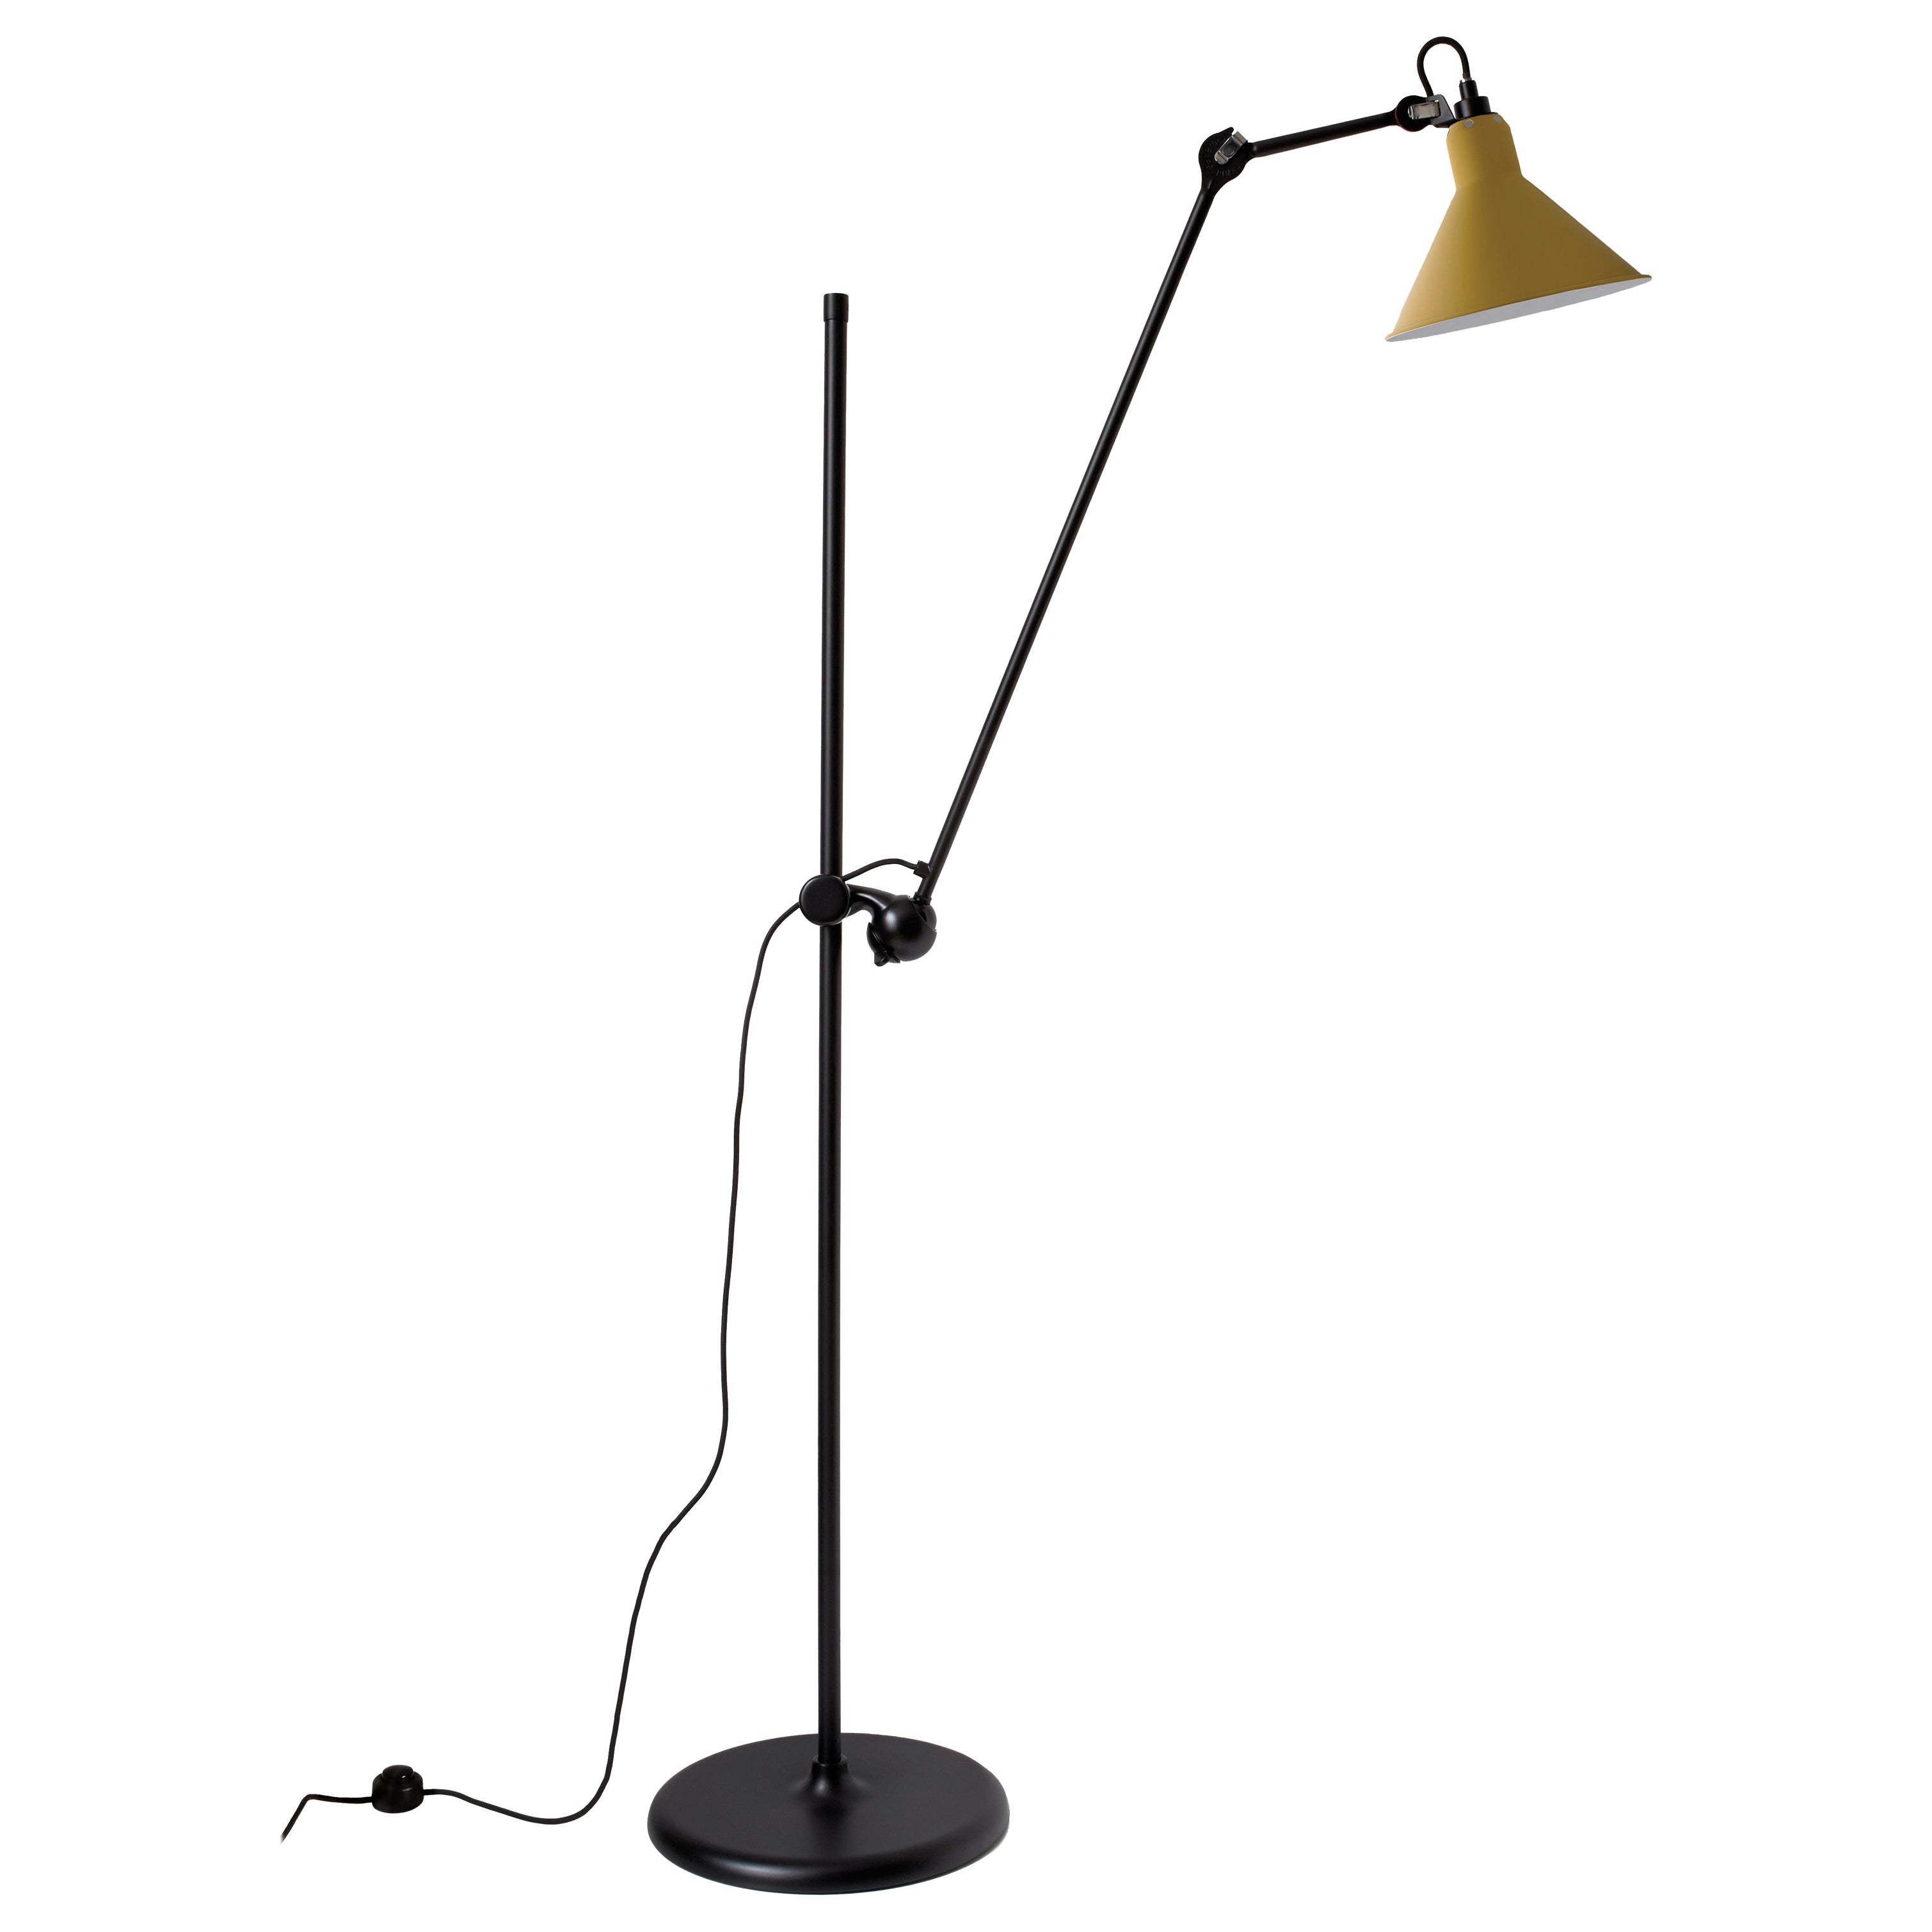 DCW Editions La Lampe Gras N°215 Floor Lamp in Black Arm and Yellow Shade For Sale